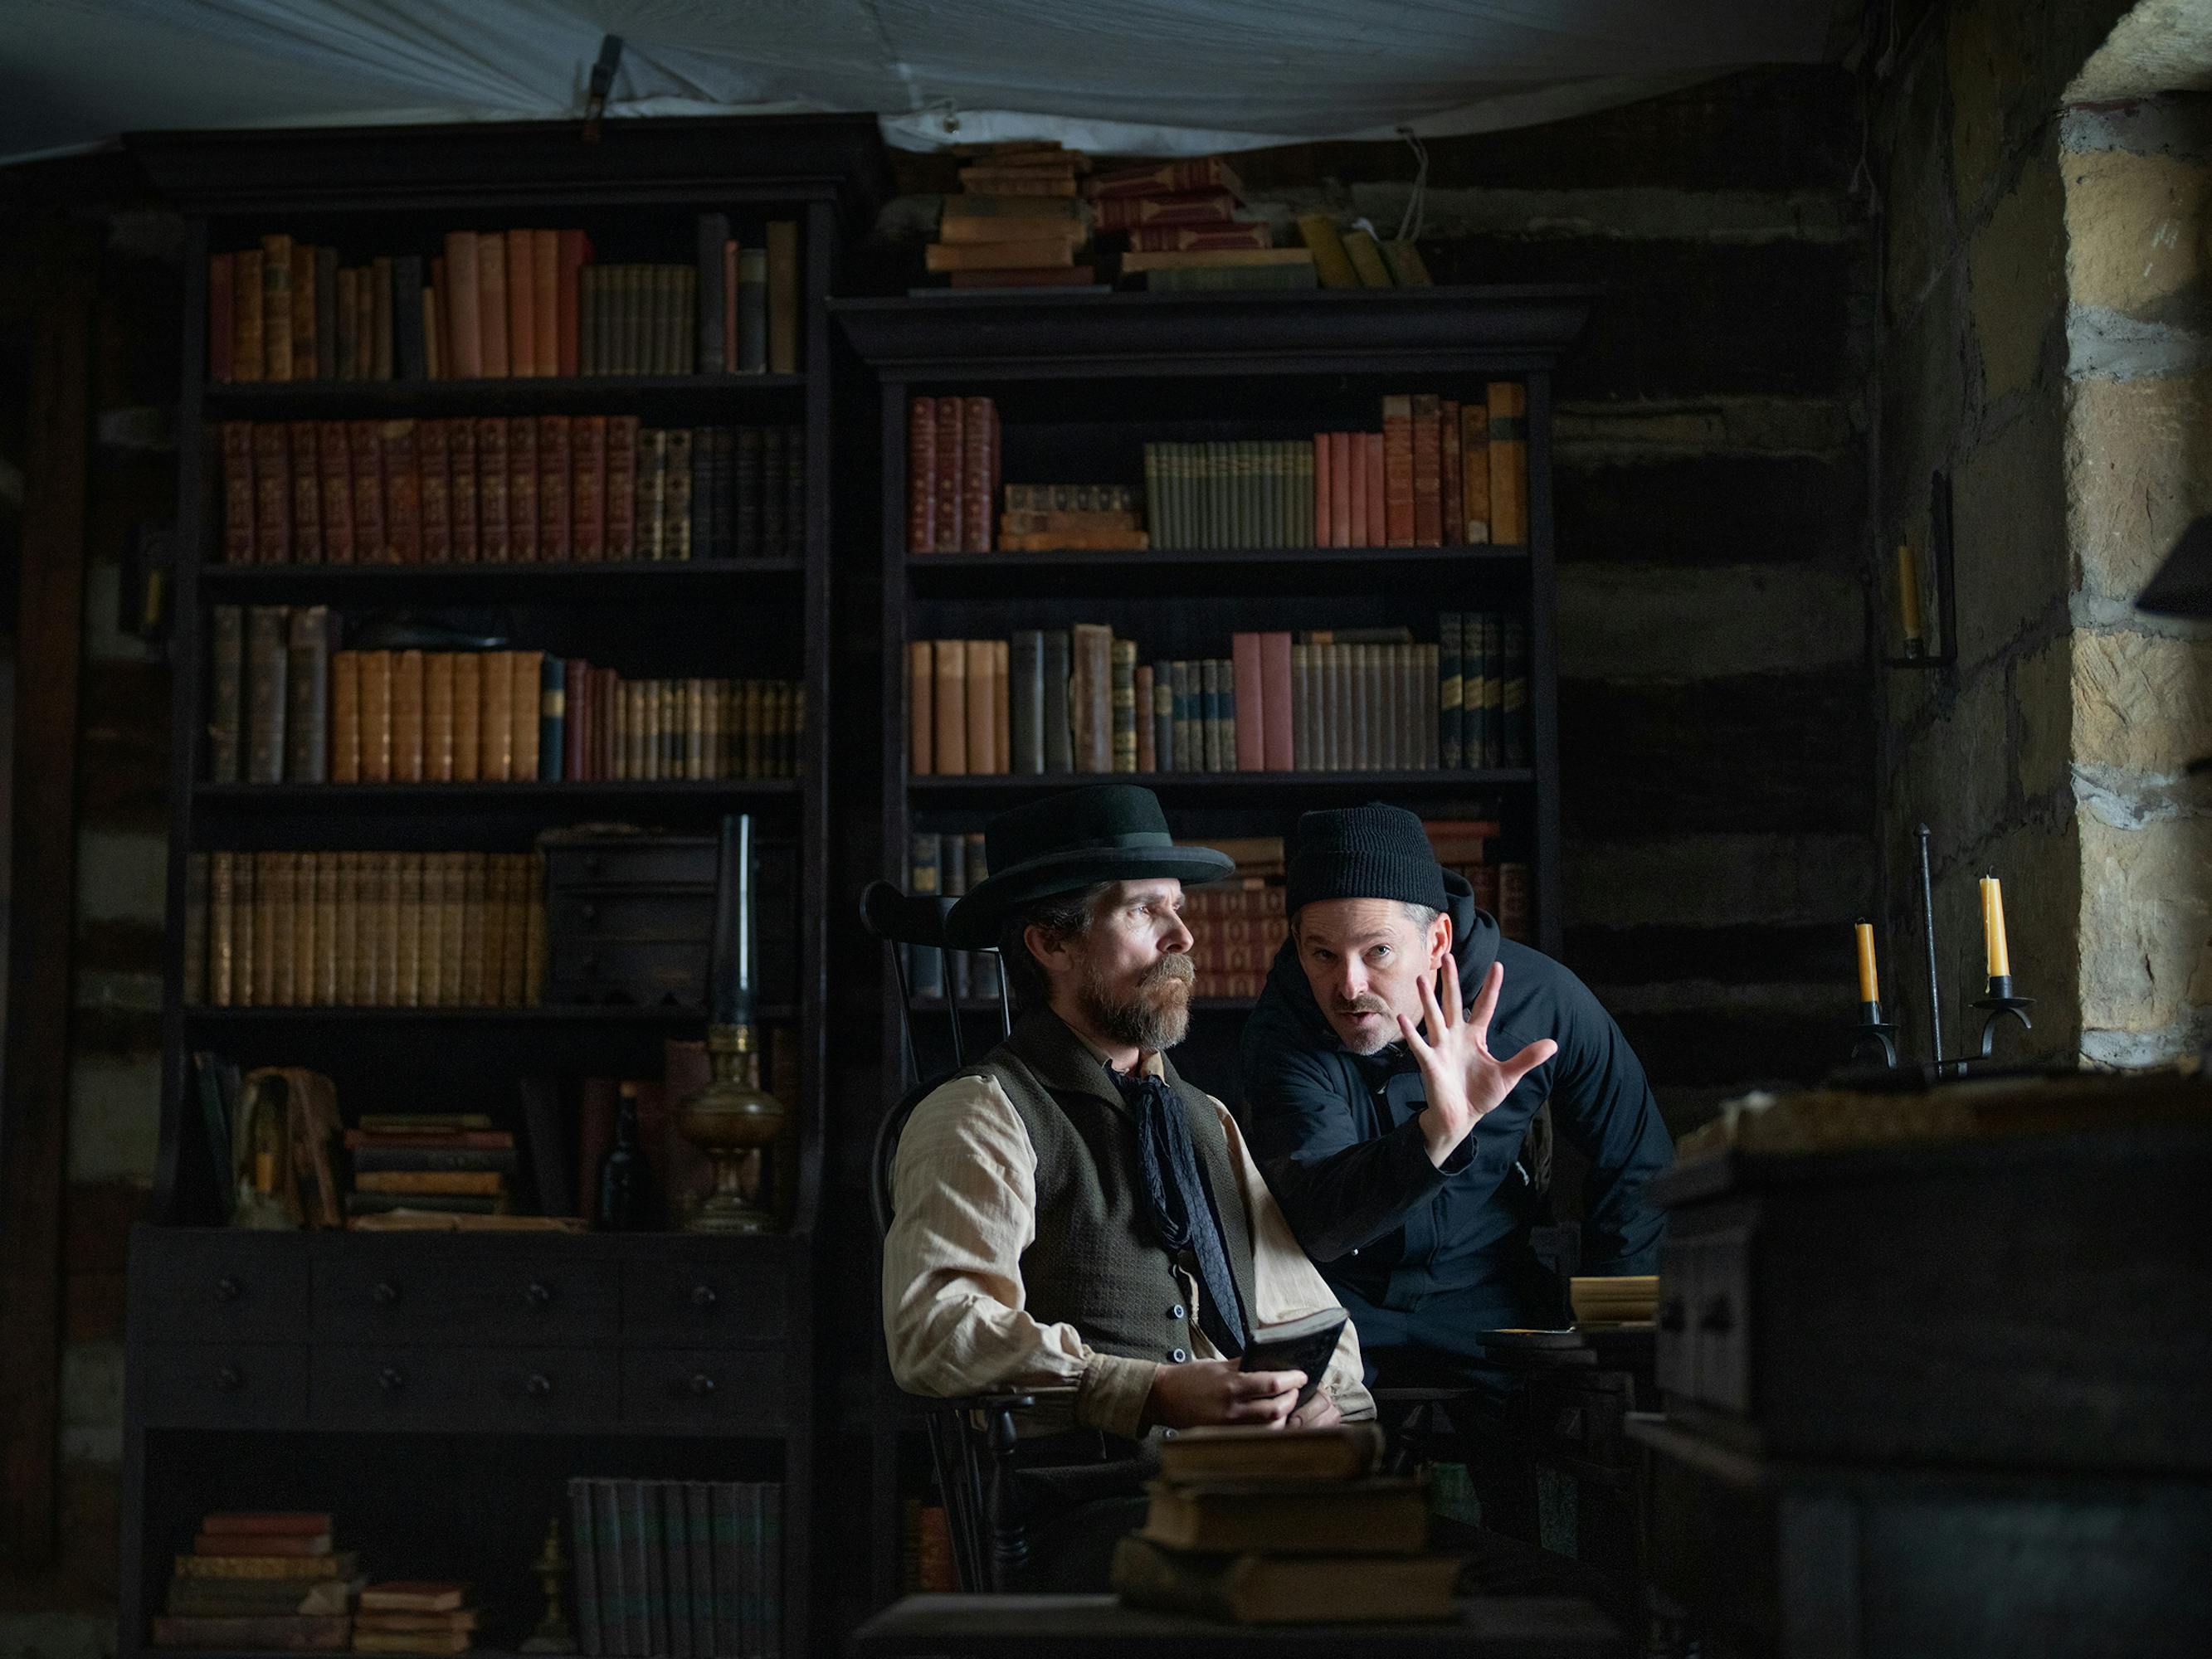 Christian Bale and Scott Cooper sit in a dark library together, with a bookshelf filled with old books behind them.